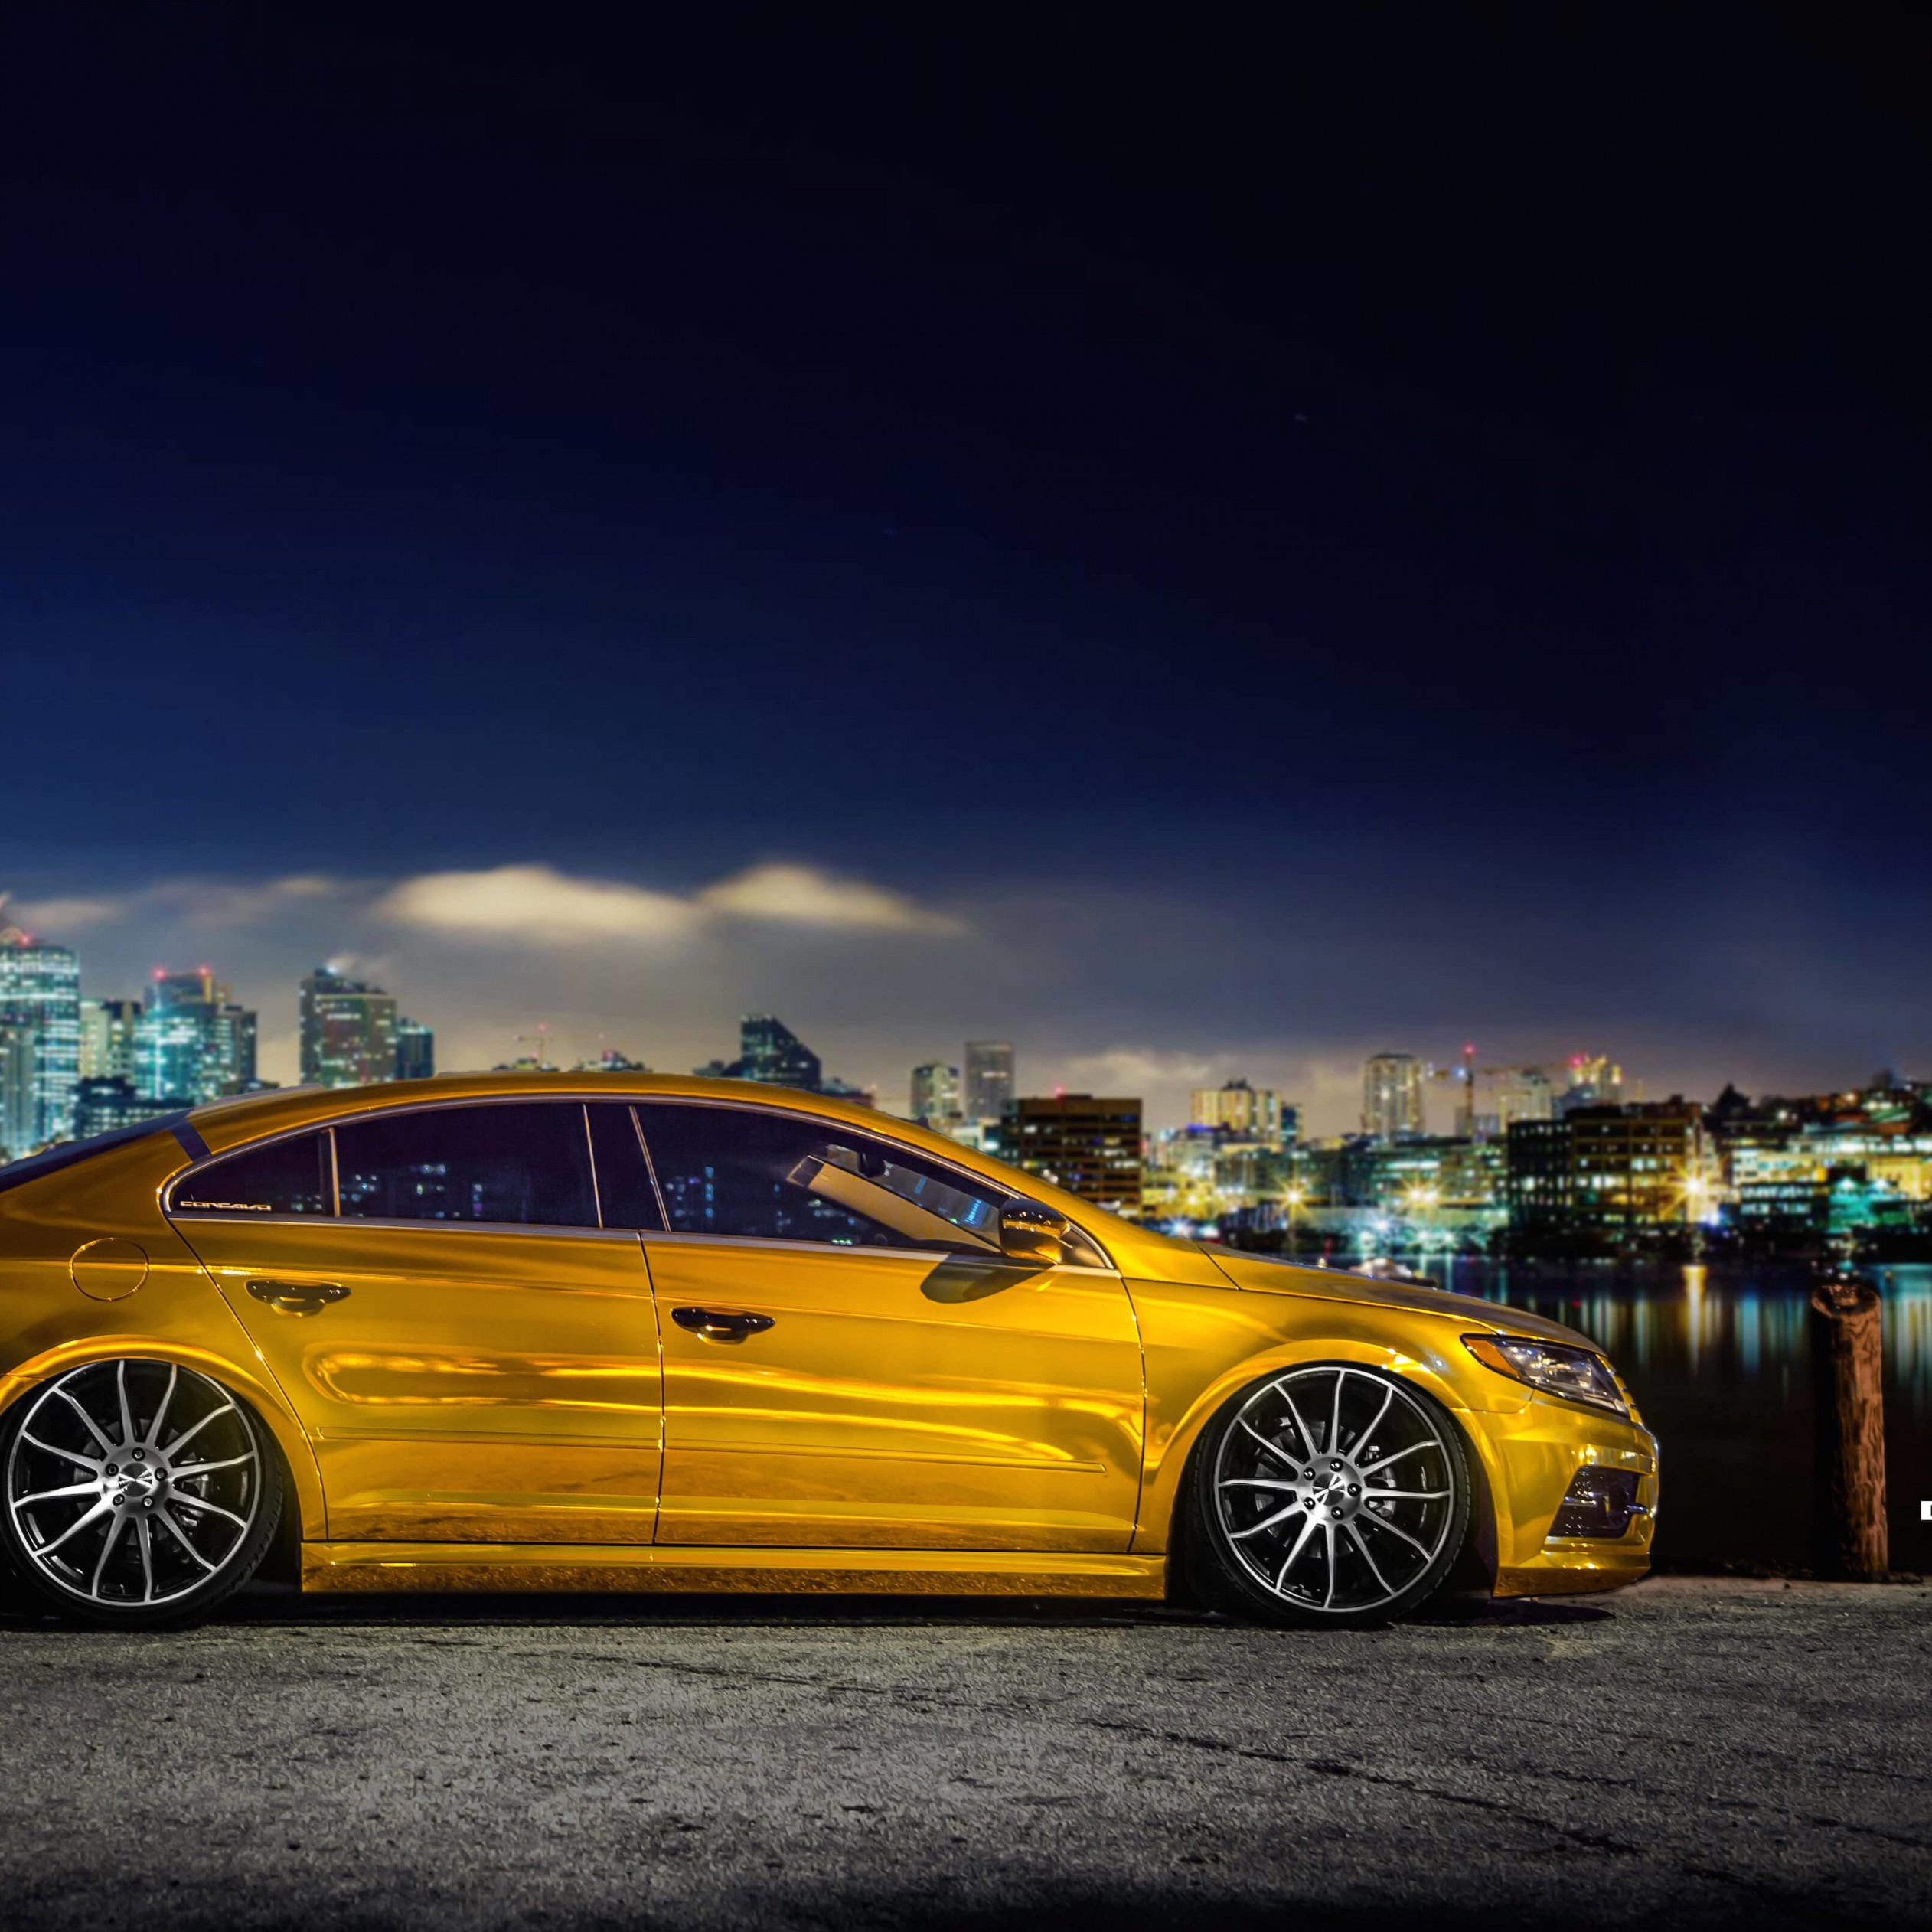 Volkswagen CC on CW-12 Concave Wheels Wallpaper for Apple iPad 4